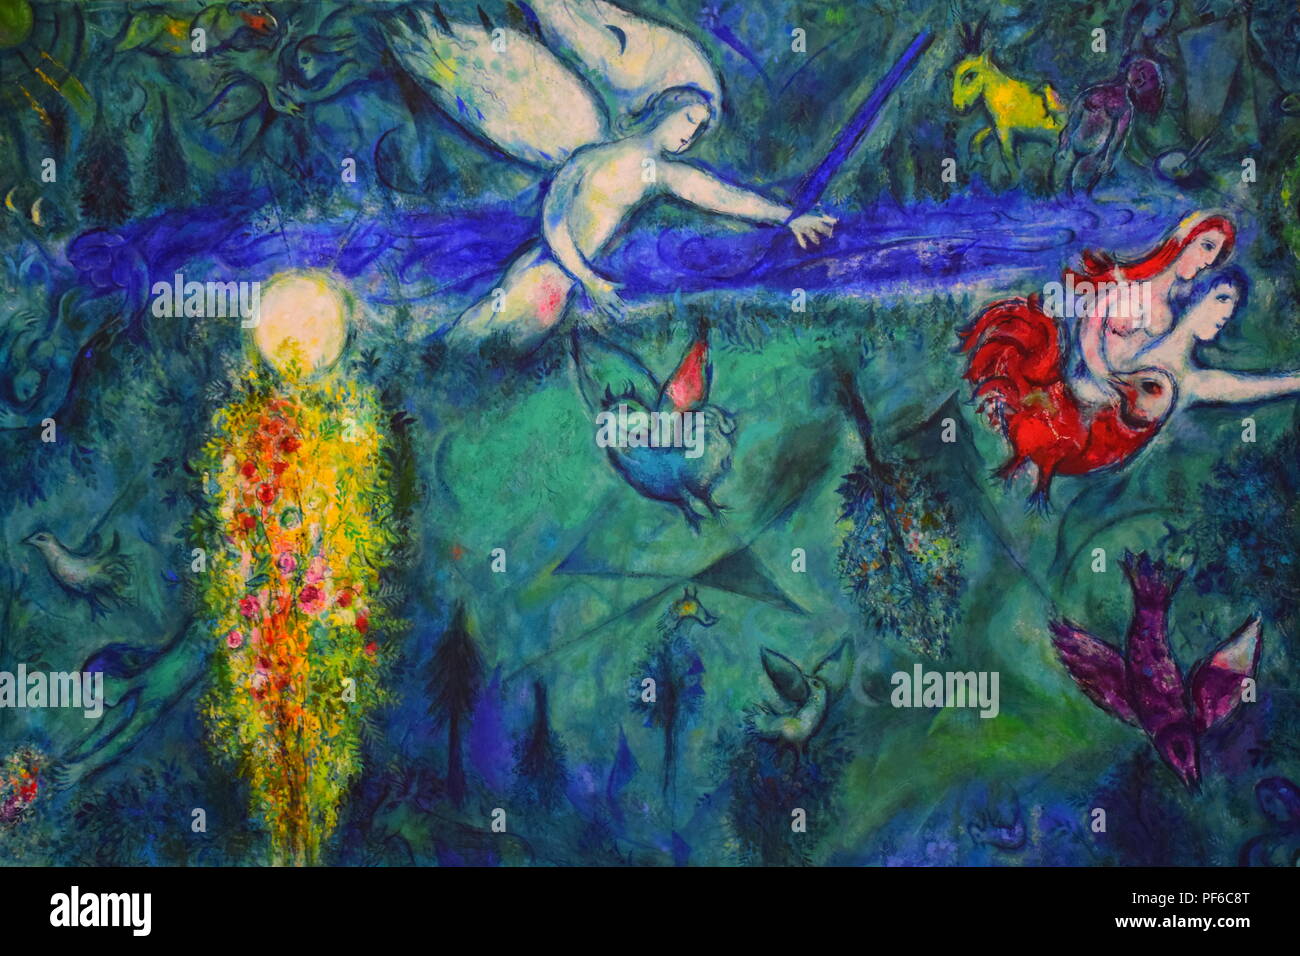 Adam and Eve Expelled from Paradise, a painting by Chagall in the Chagall Museum in Nice, France Stock Photo